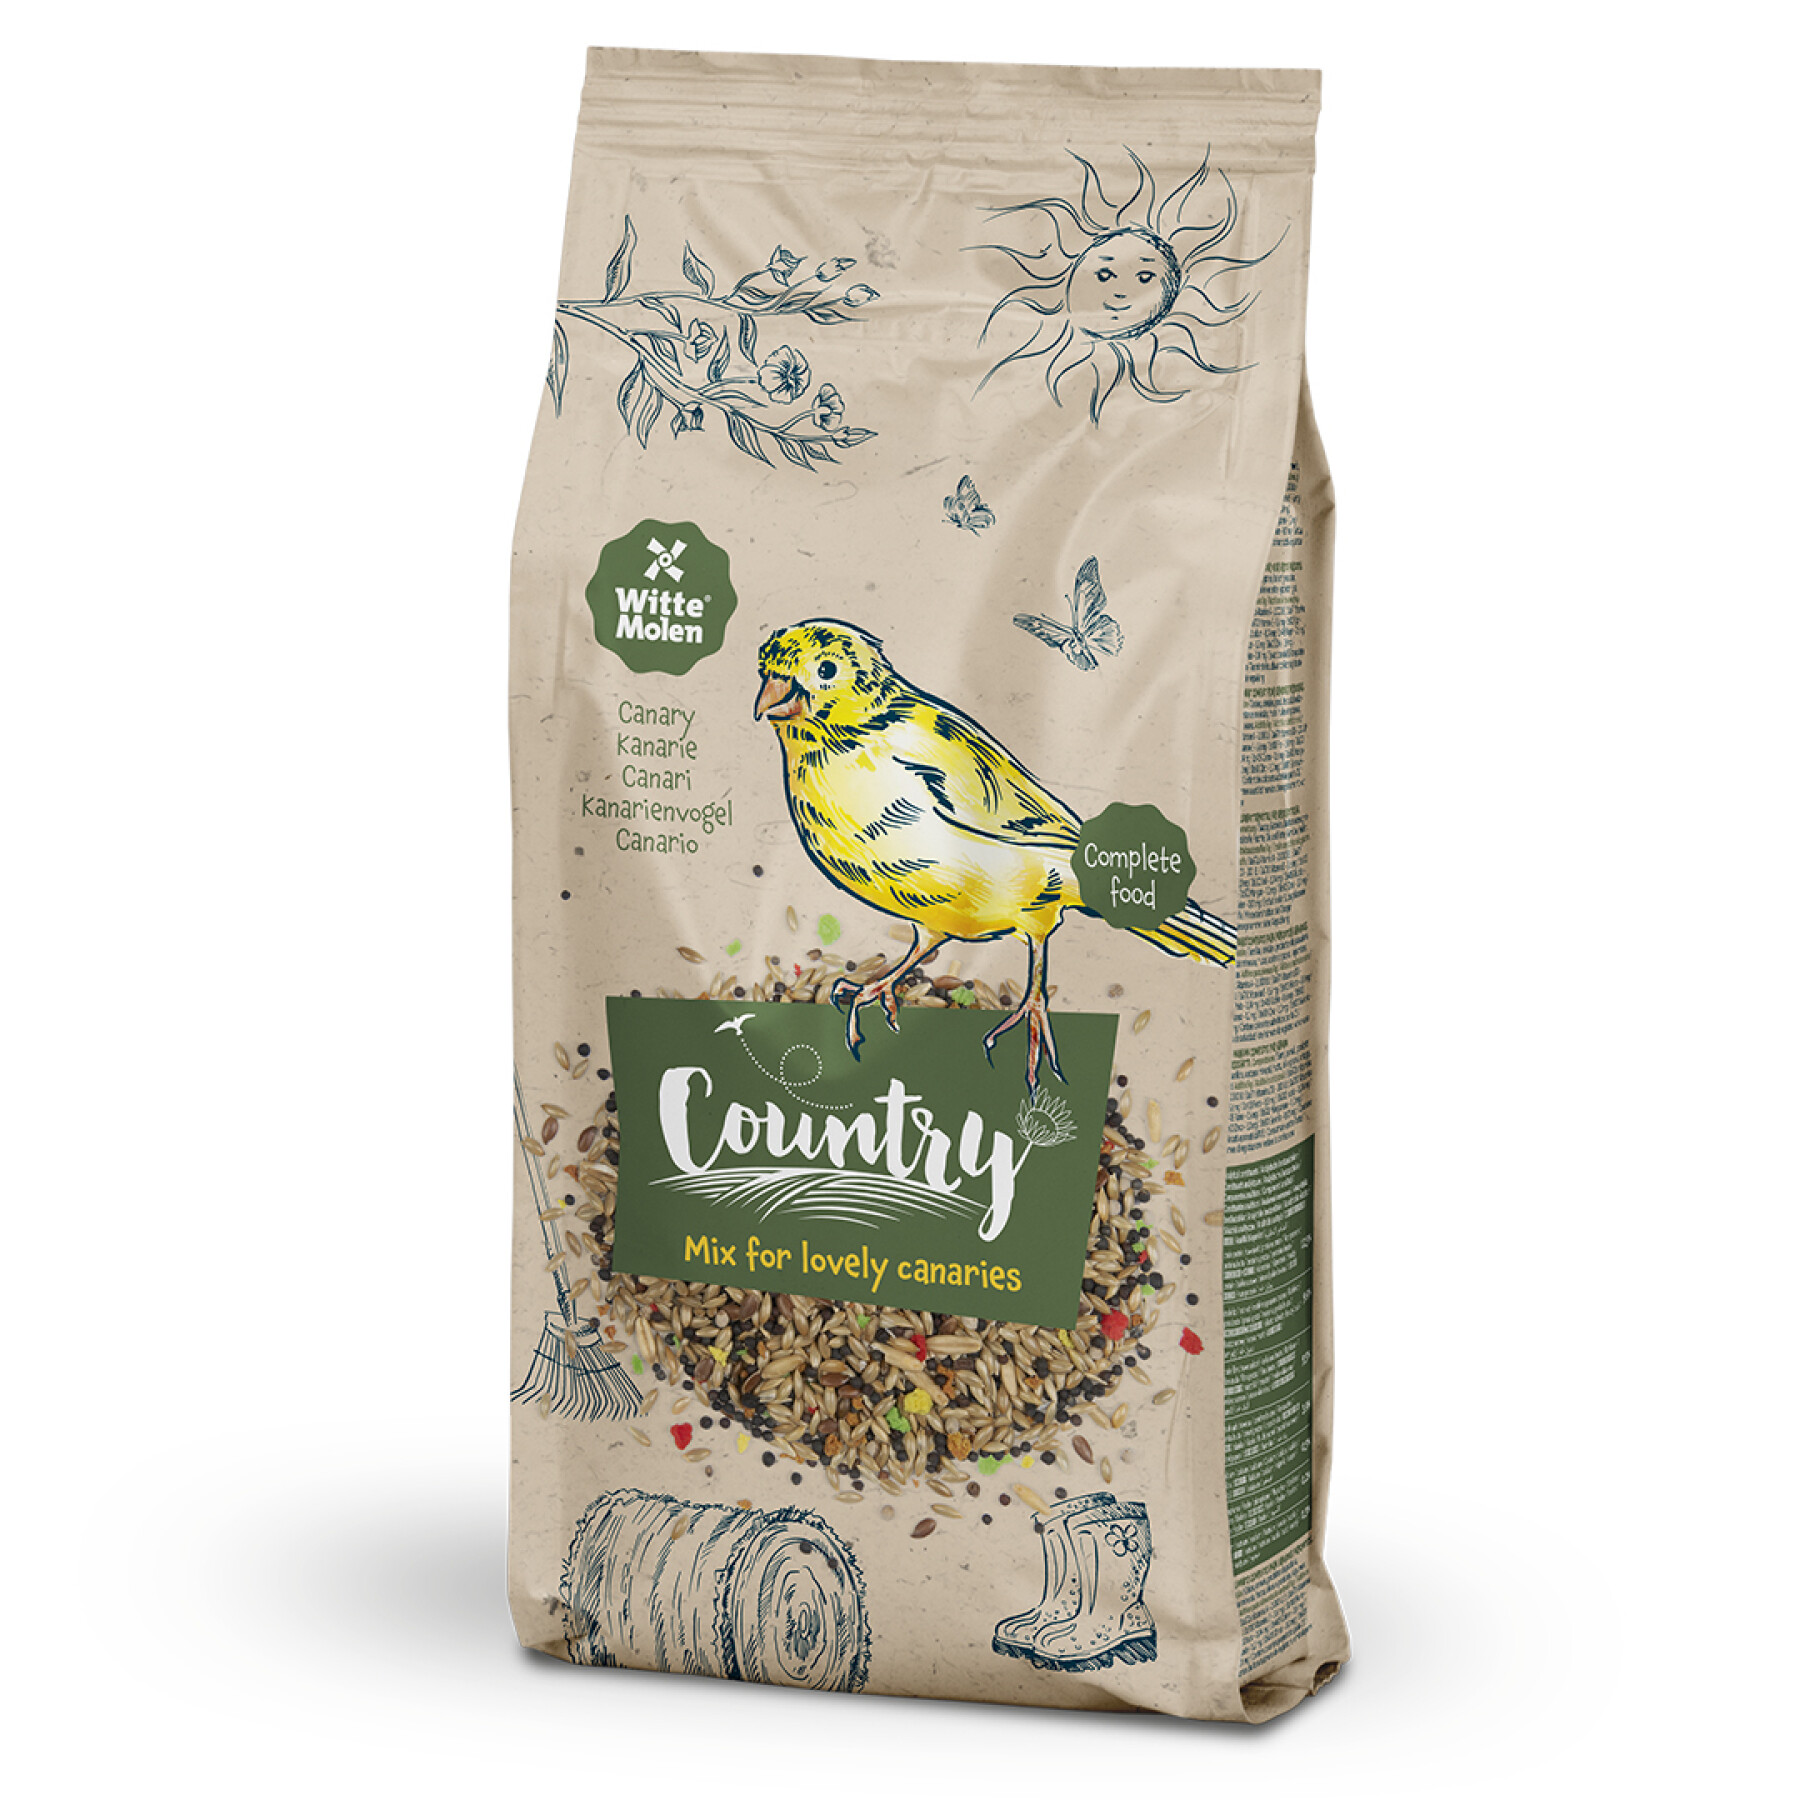 Food supplement for canaries Witte Molen Country